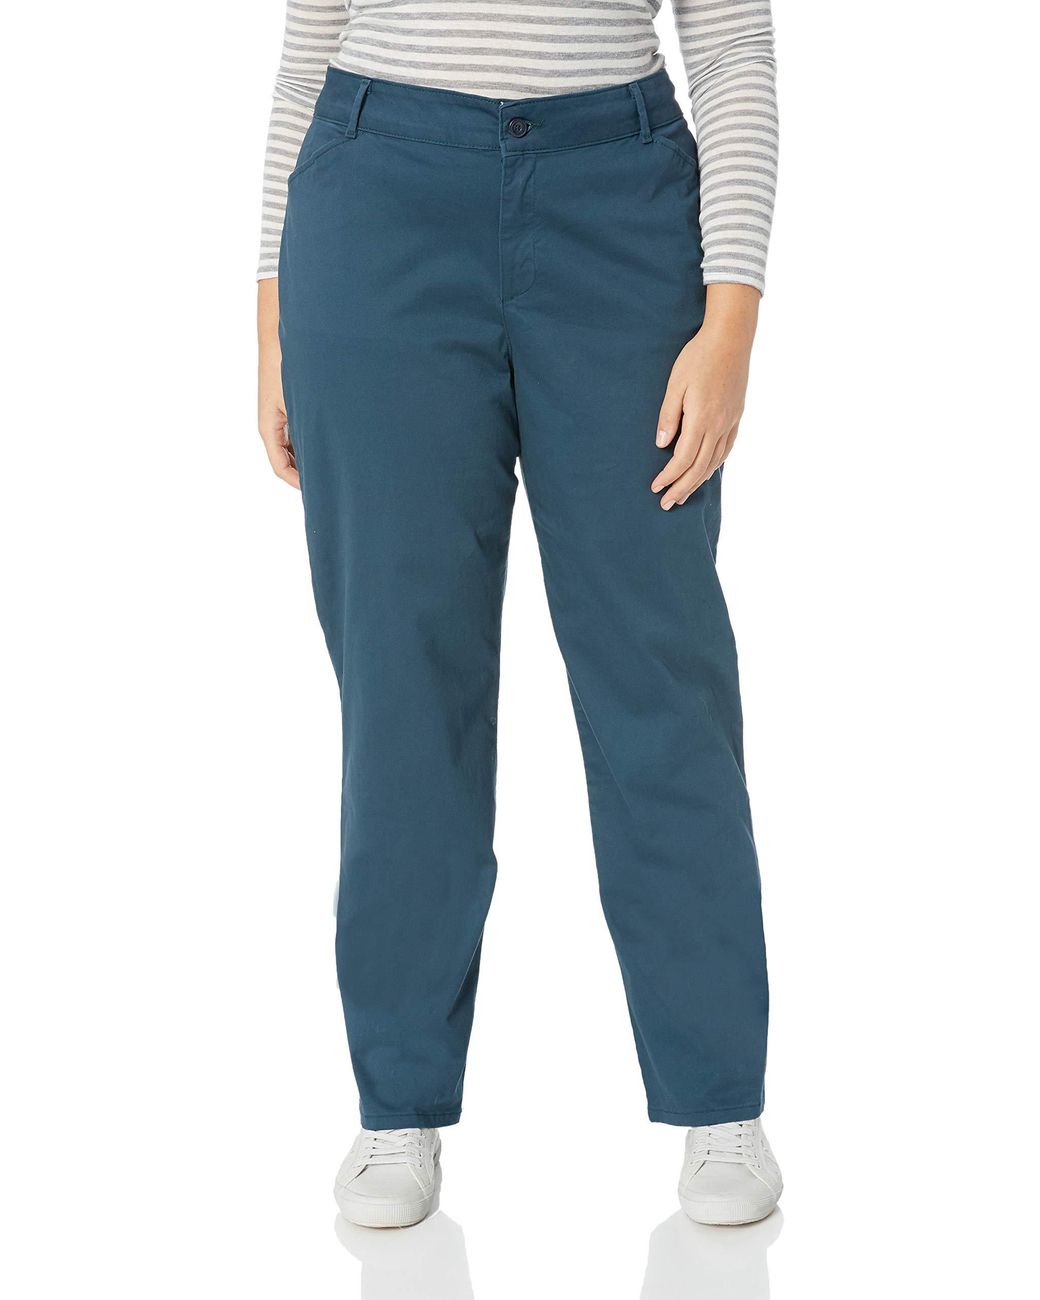 Lee Jeans Plus-size Relaxed-fit All Day Pant in Blue - Lyst